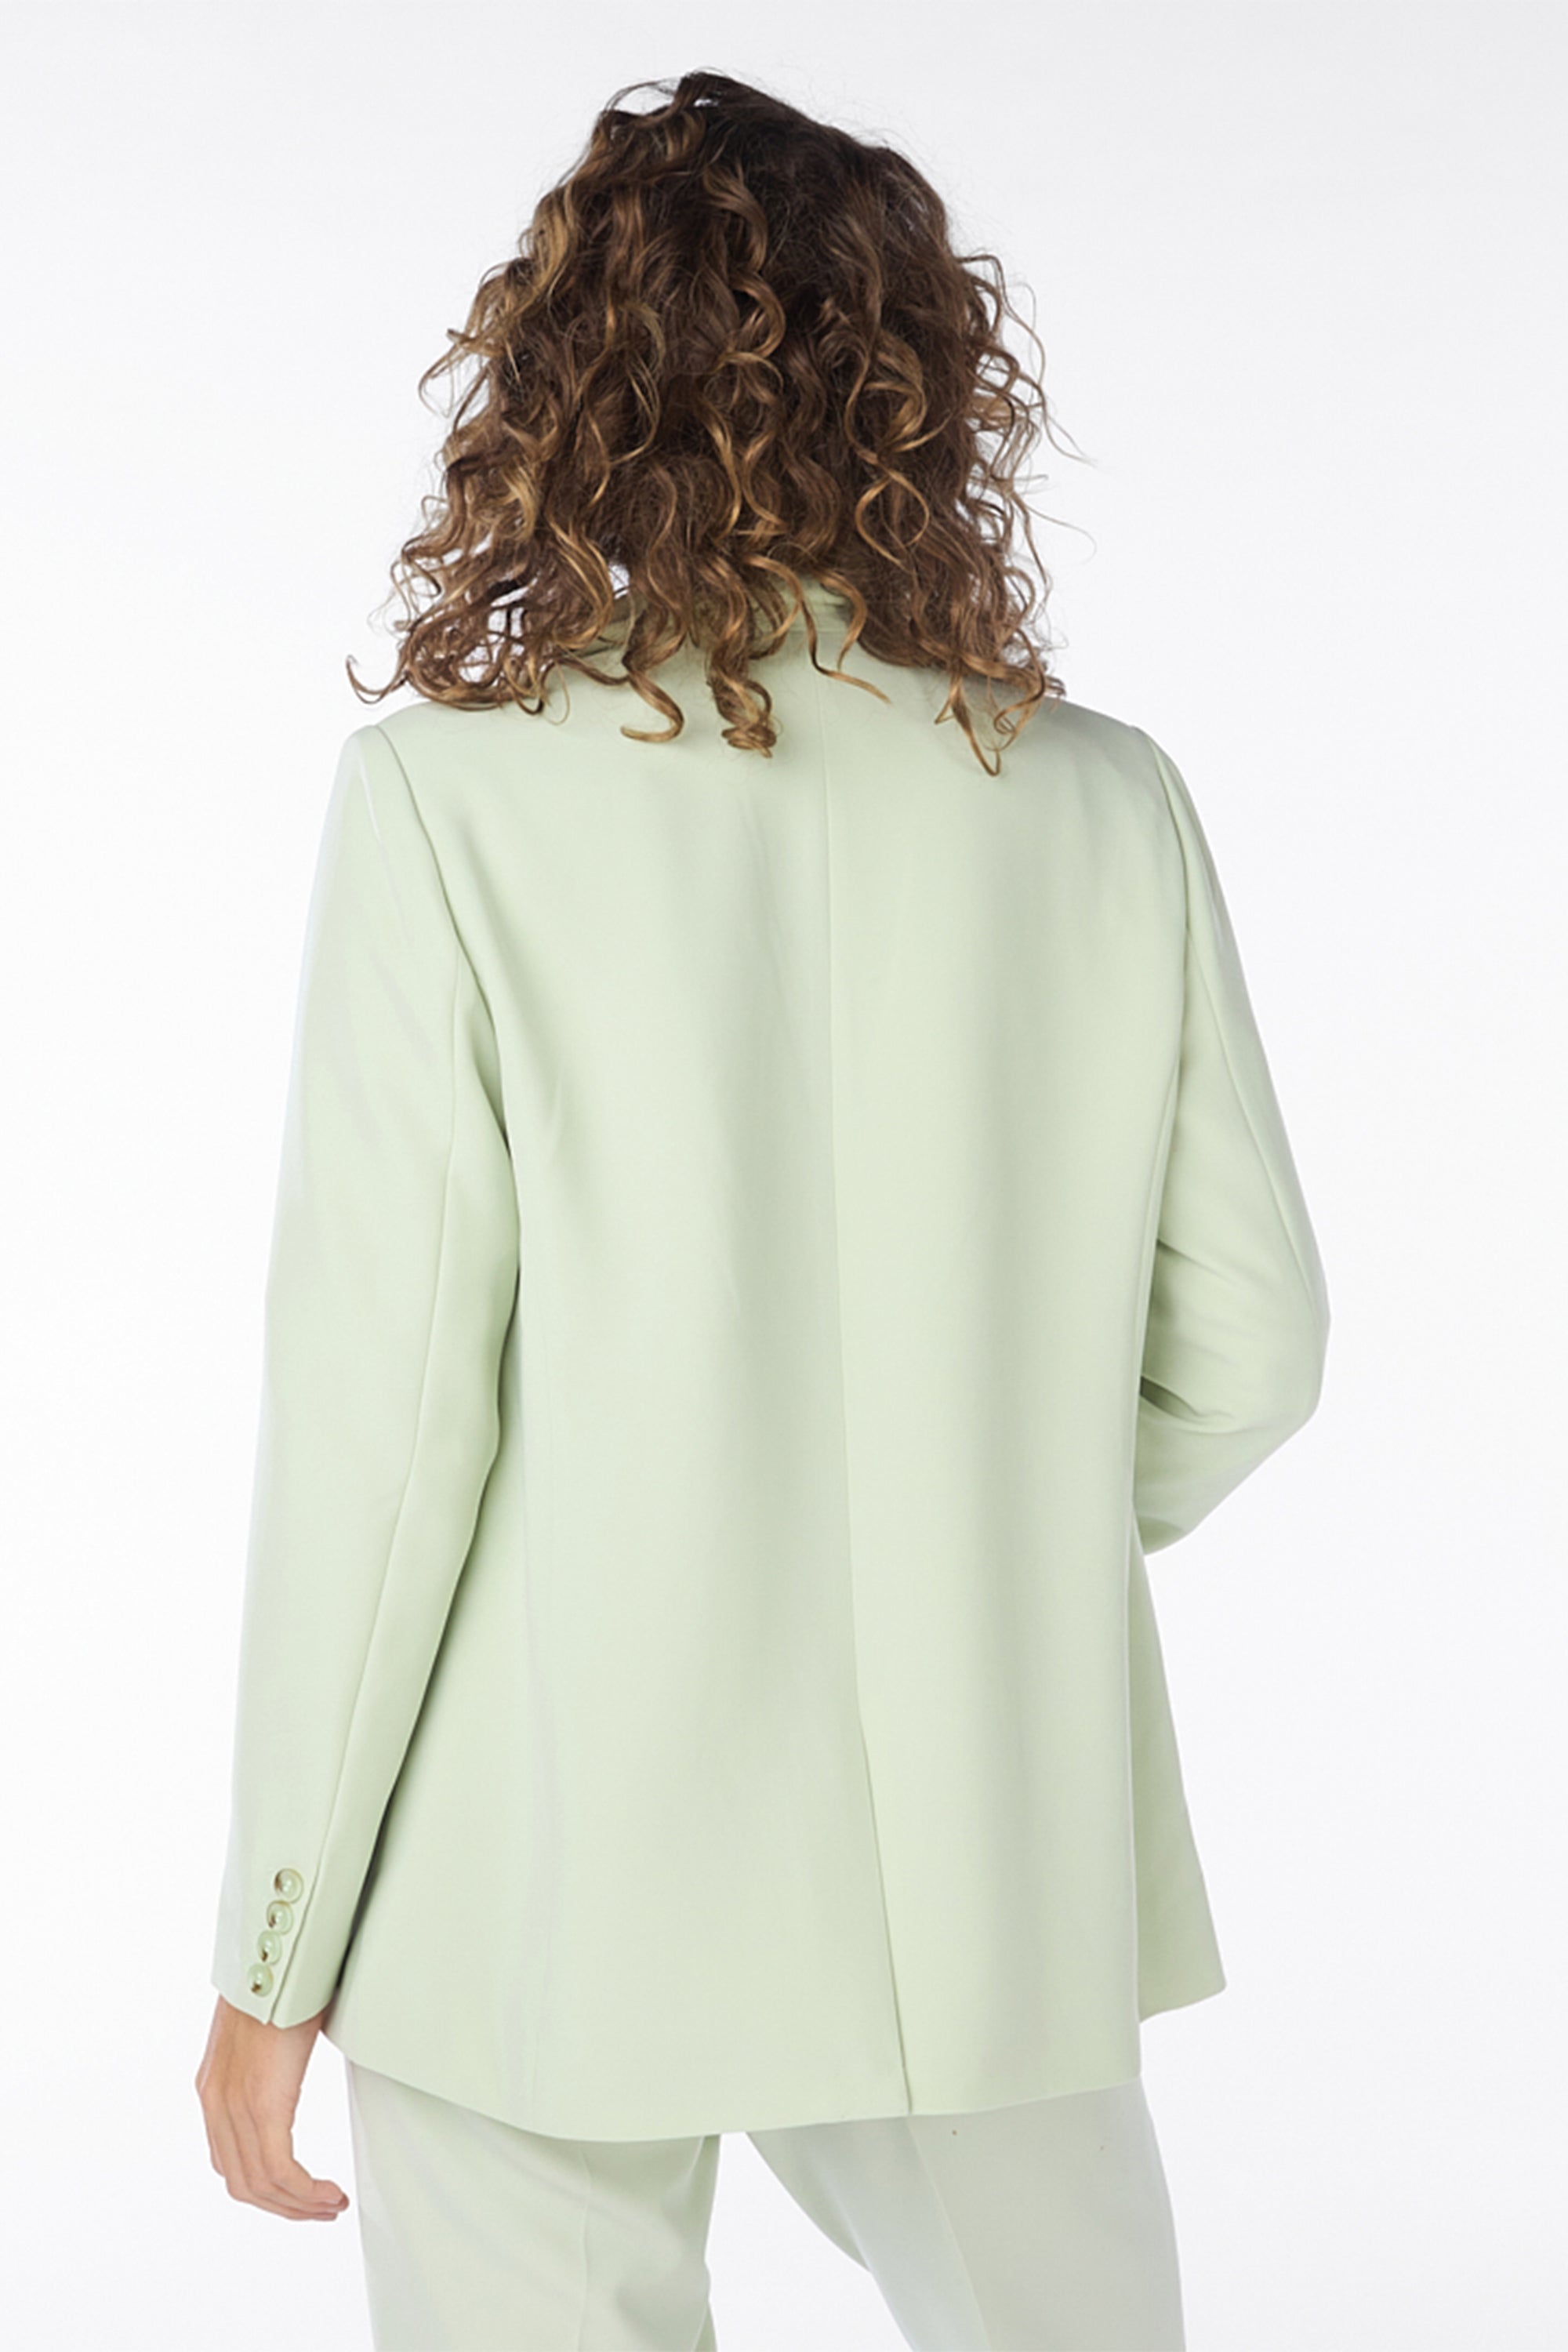 Back view of Esqualo (SP2410022) Women's Long Sleeve Tailored Blazer with Notch Collar, Single Button Close, and Front Pockets in Pistachio green